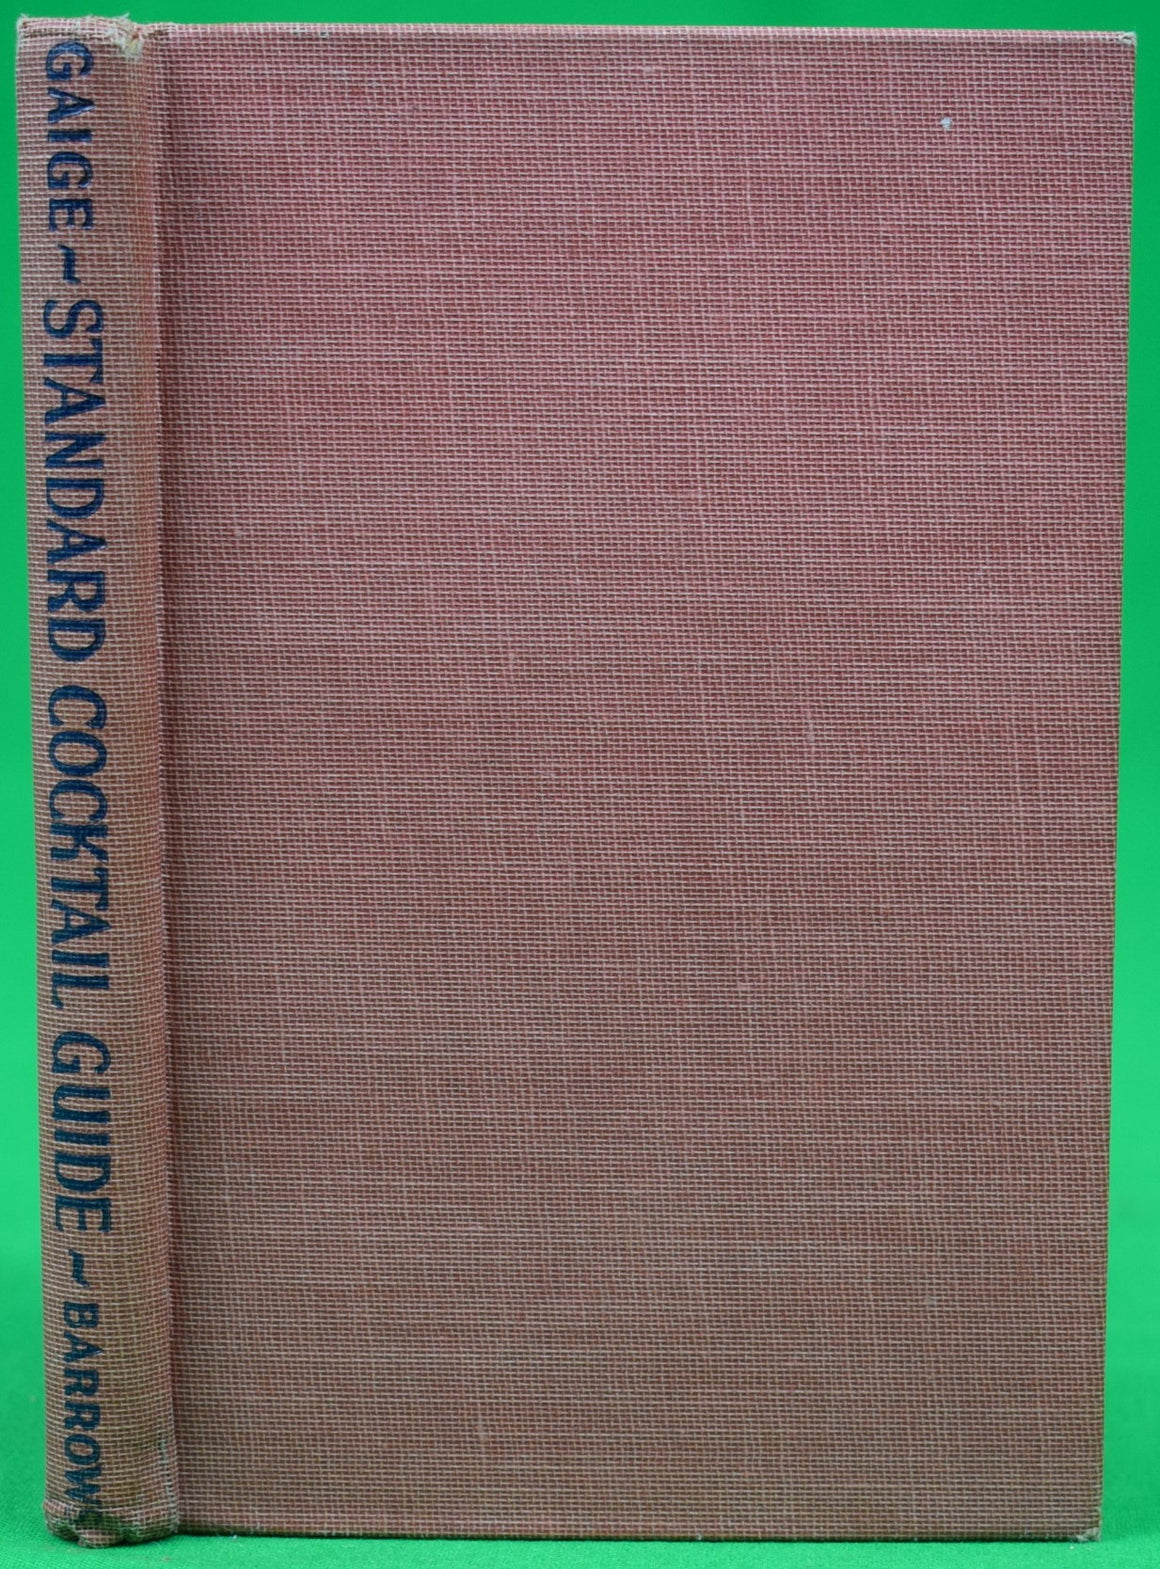 "The Standard Cocktail Guide" 1944 GAIGE, Crosby